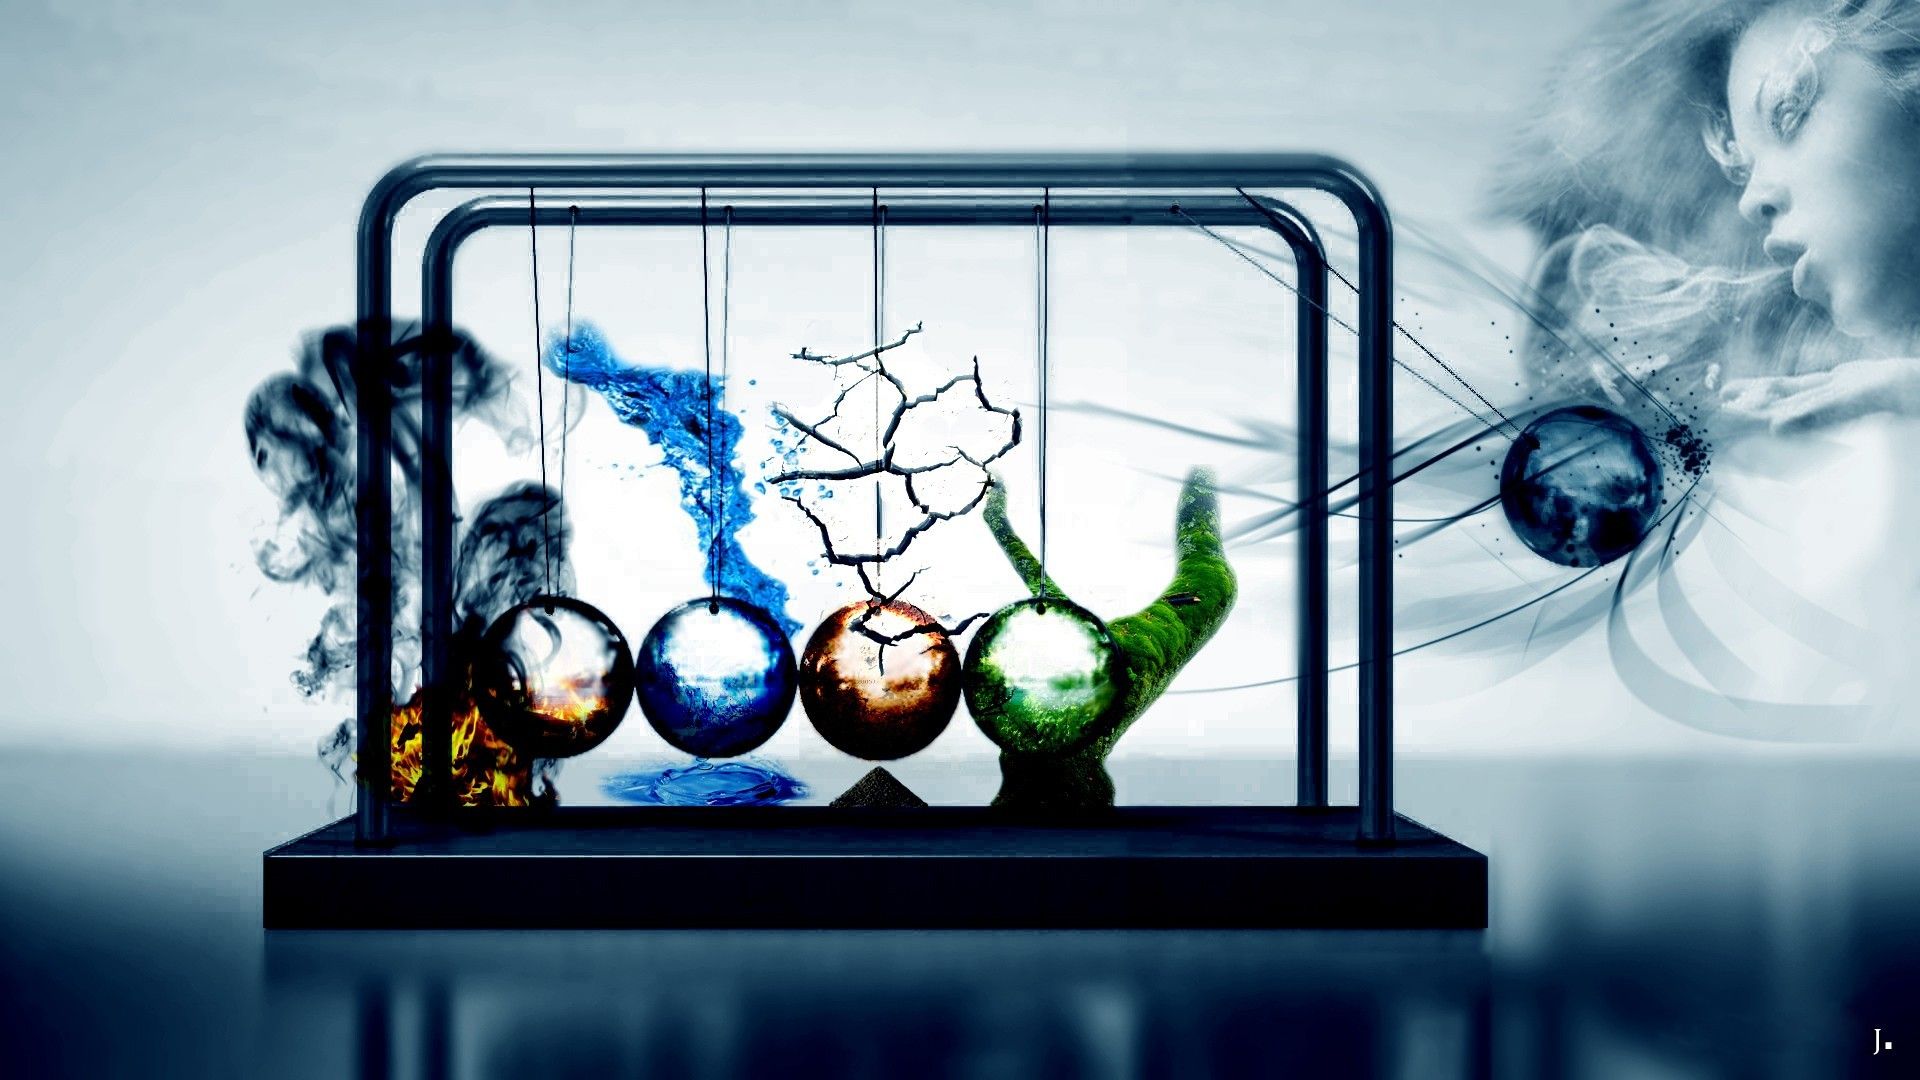 #elements #four elements #Newtons cradle #simple background #balls #science #air #abstract #Earth #wind #women #digital art #fire #nature #ball #water wallpaper HD Wallpaper